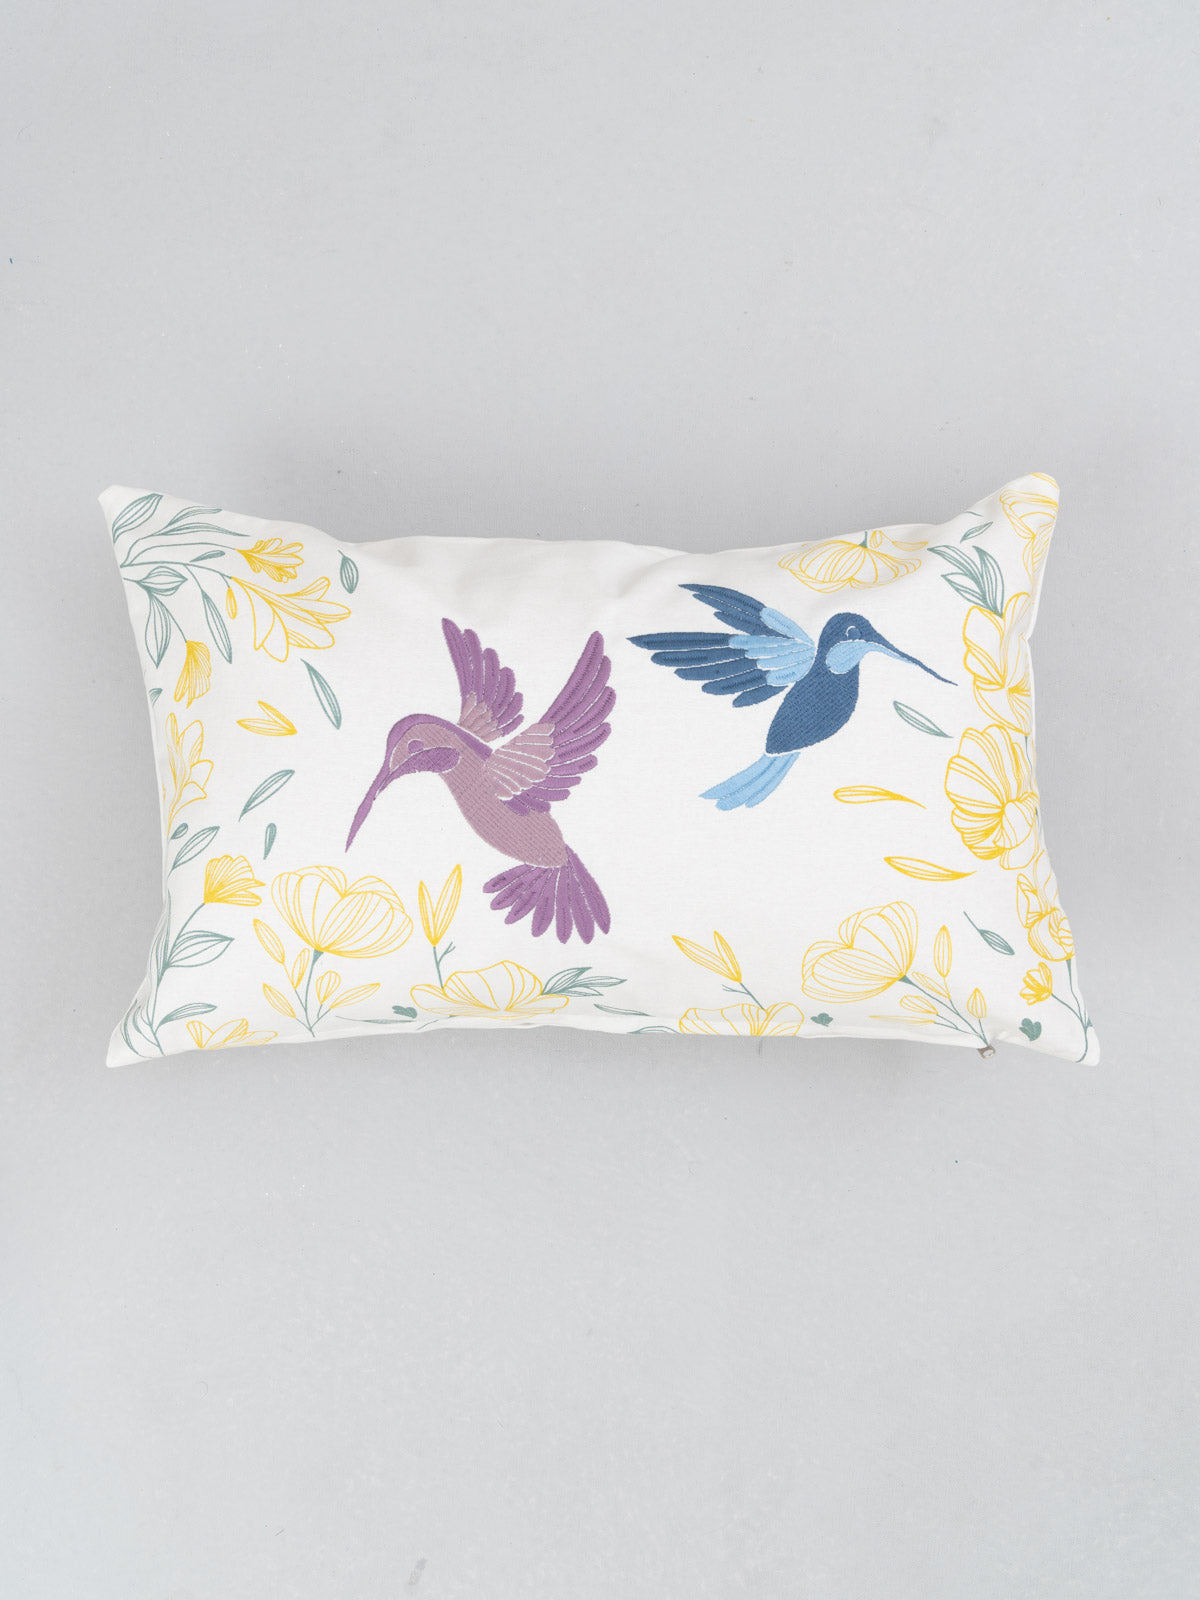 Humming Birds, Fields Of Lavender, Grape Solid, Gingham Sage Green Set Of 4 Combo Cotton Cushion Cover - Lavender, Sage Green